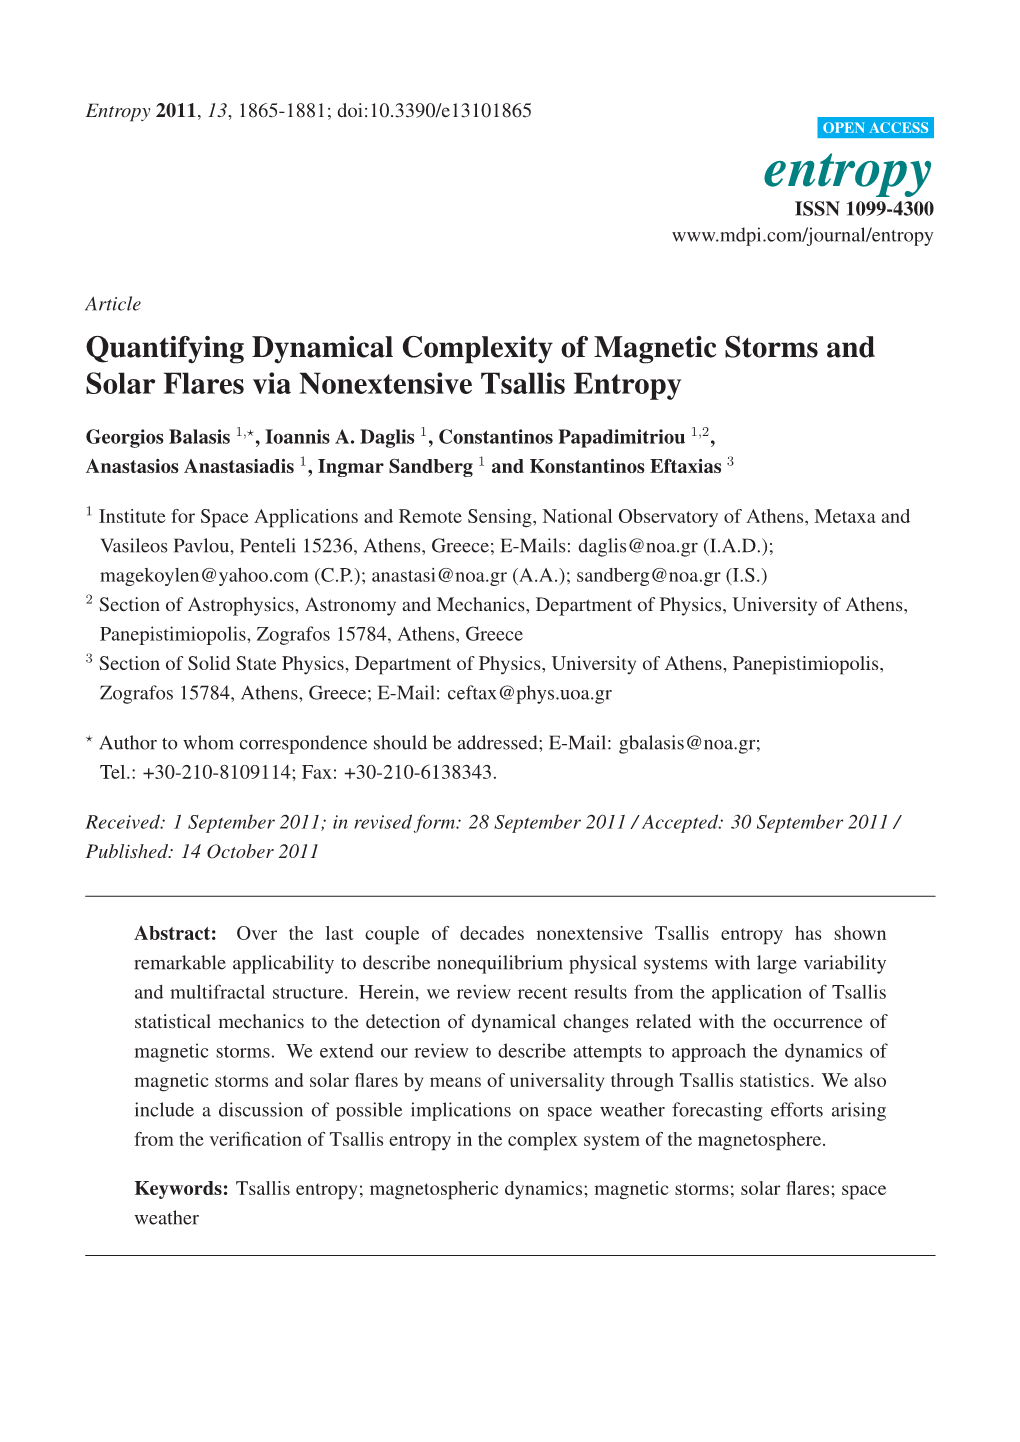 Quantifying Dynamical Complexity of Magnetic Storms and Solar Flares Via Nonextensive Tsallis Entropy